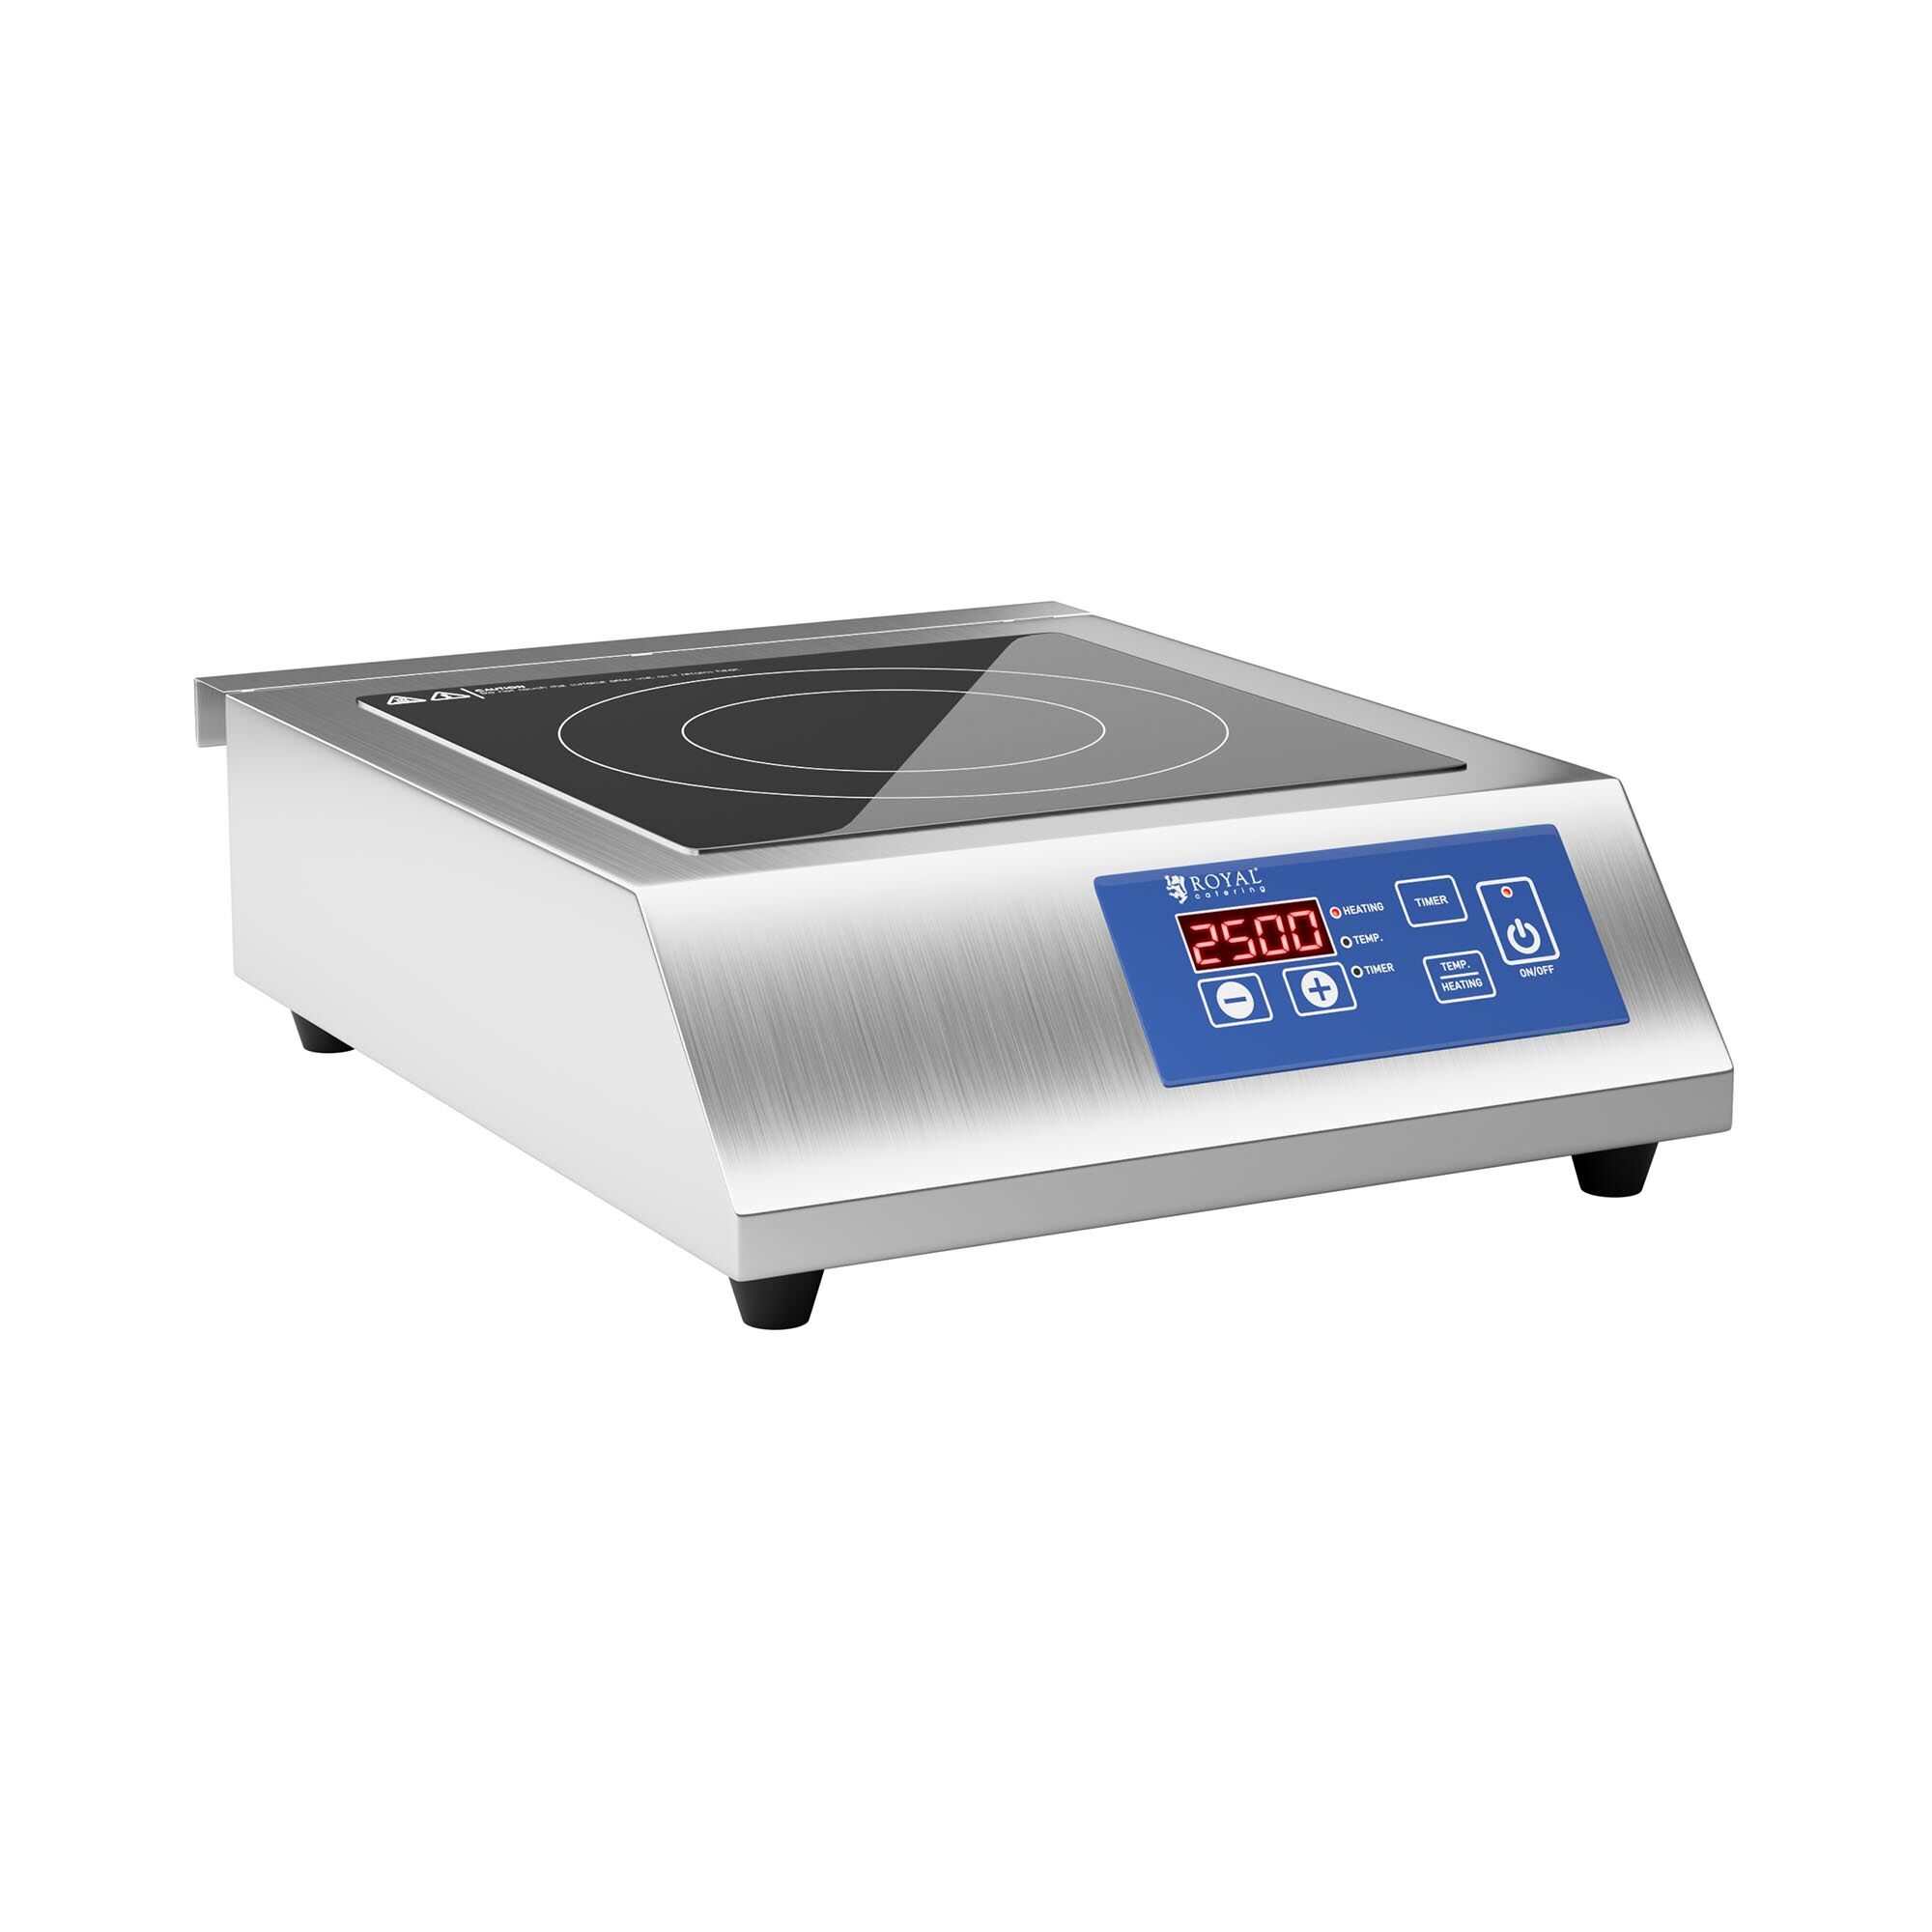 Royal Catering Piastra a induzione - 26 cm - Da 60 a 240 °C - Display touch LED - Timer RCIK-3500CGP